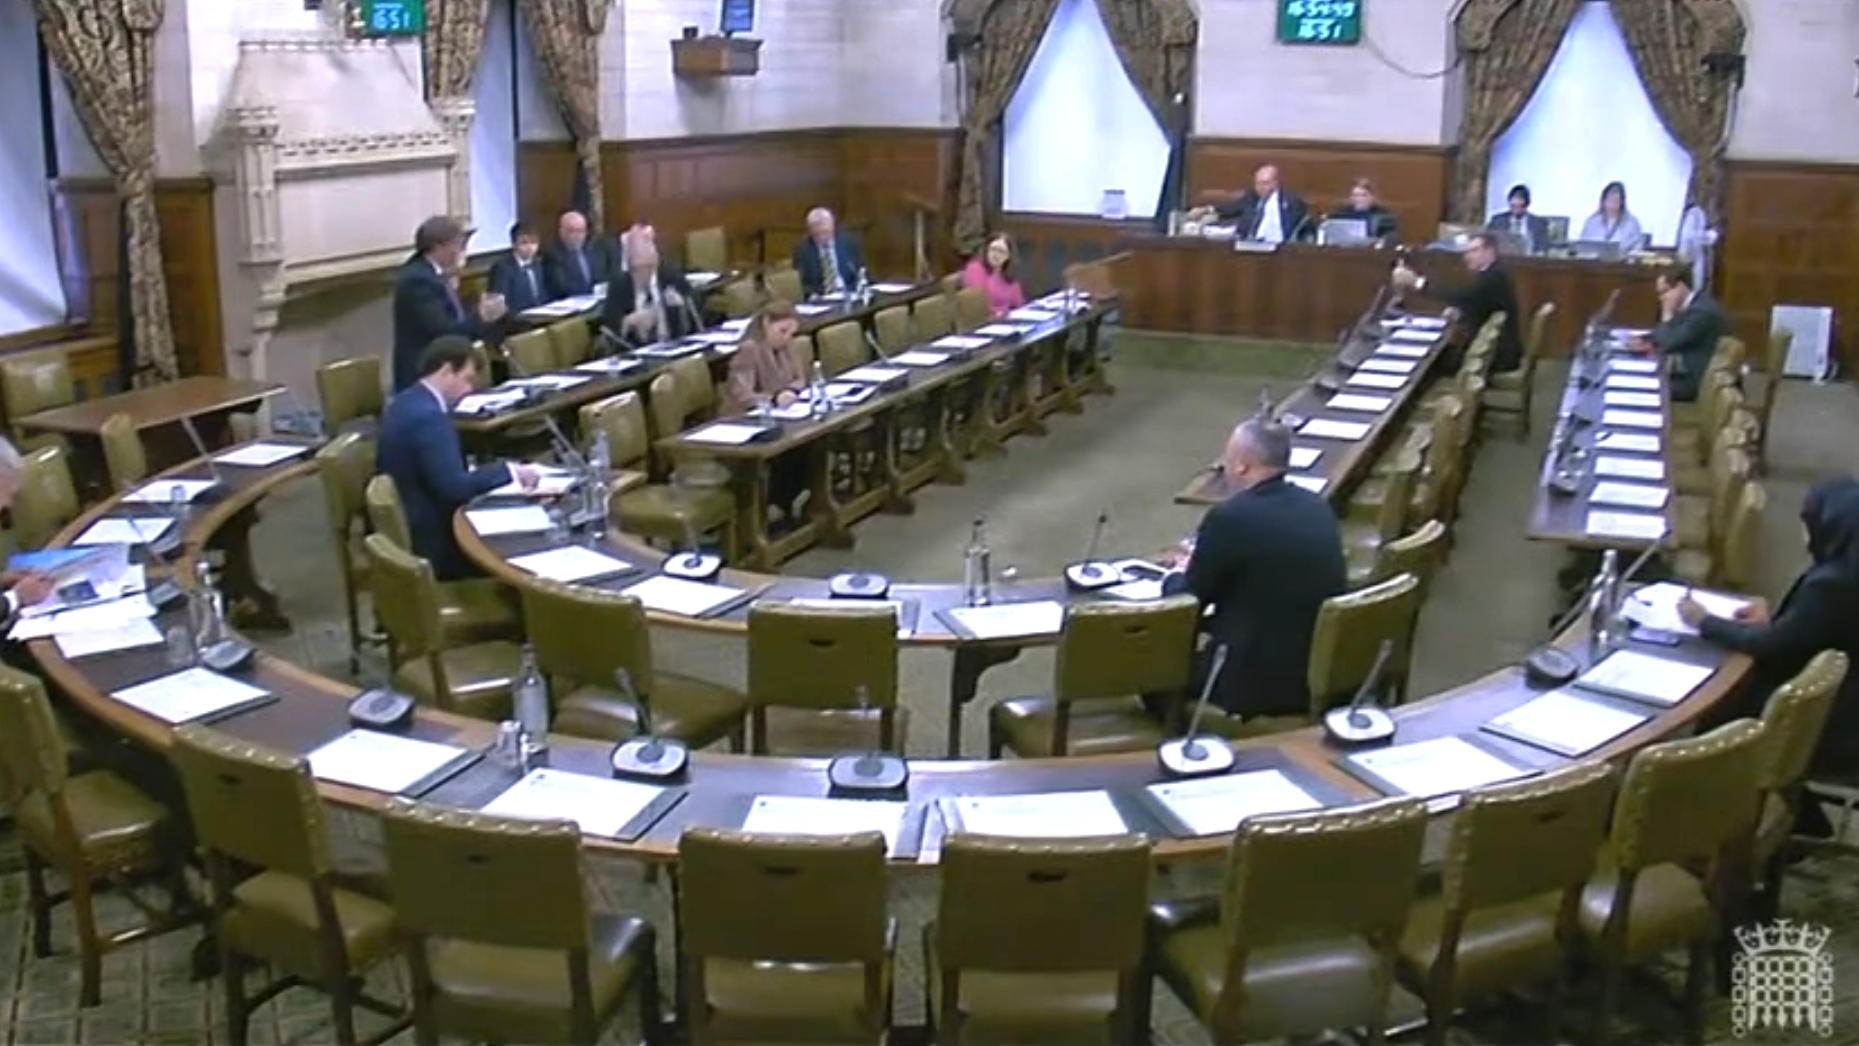 Covid-19 Vaccines: Safety. Clip from U.K. E-petition debate